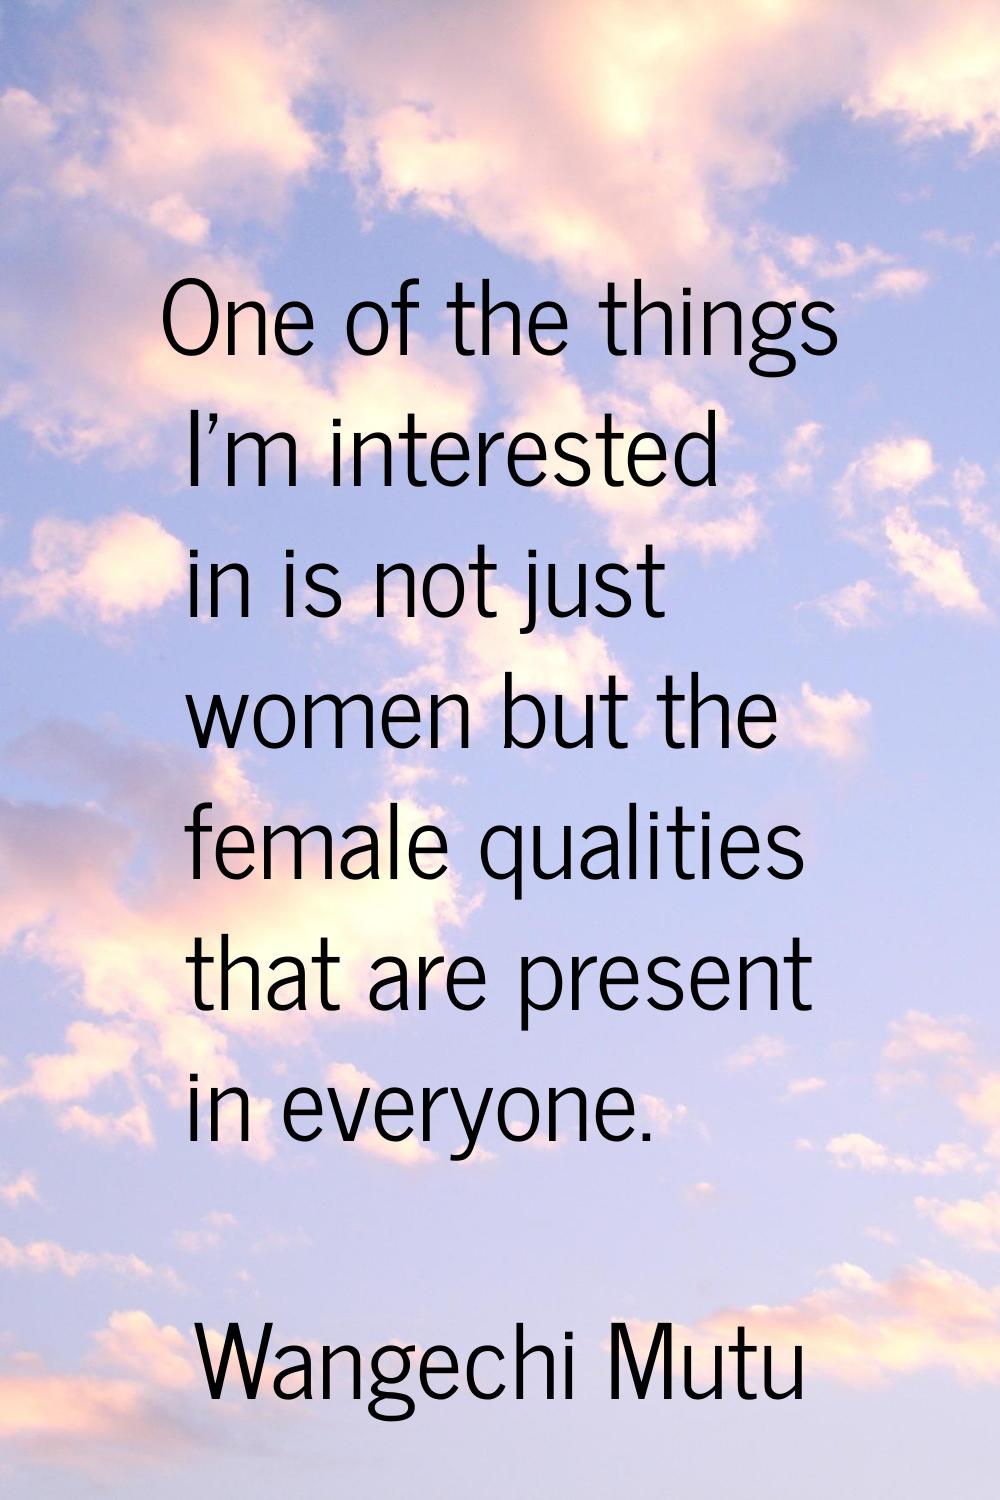 One of the things I'm interested in is not just women but the female qualities that are present in 